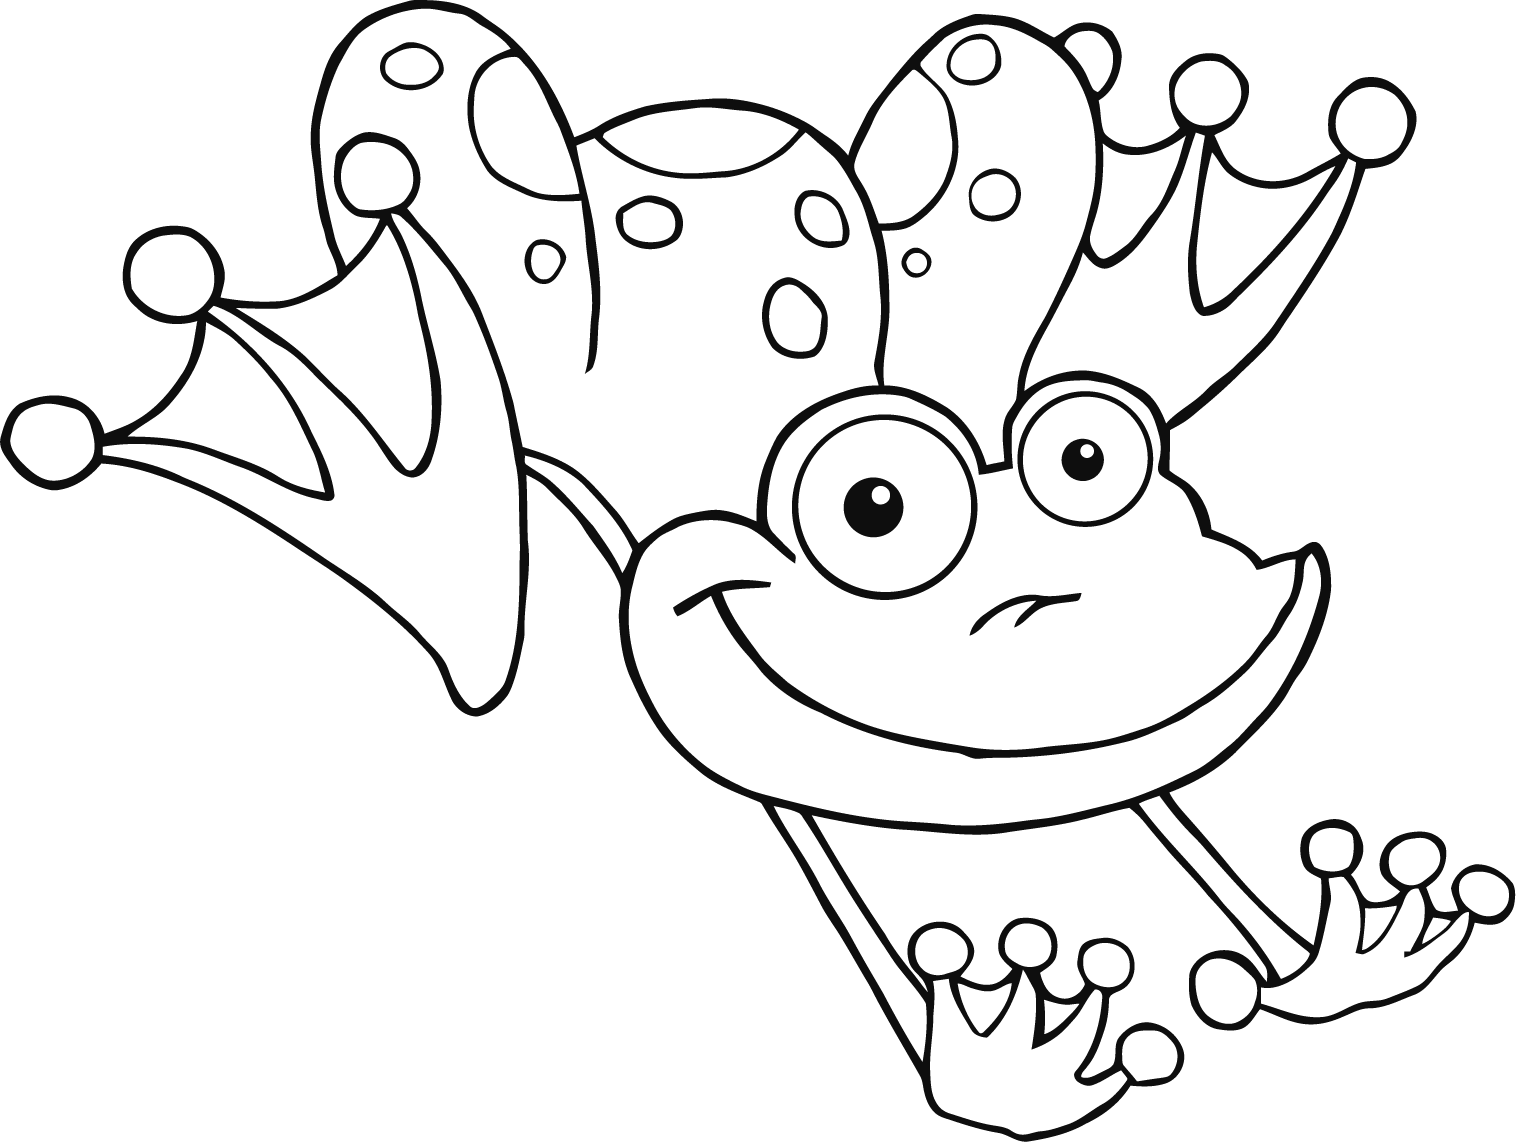 Jumping Frog Coloring Page For Kids